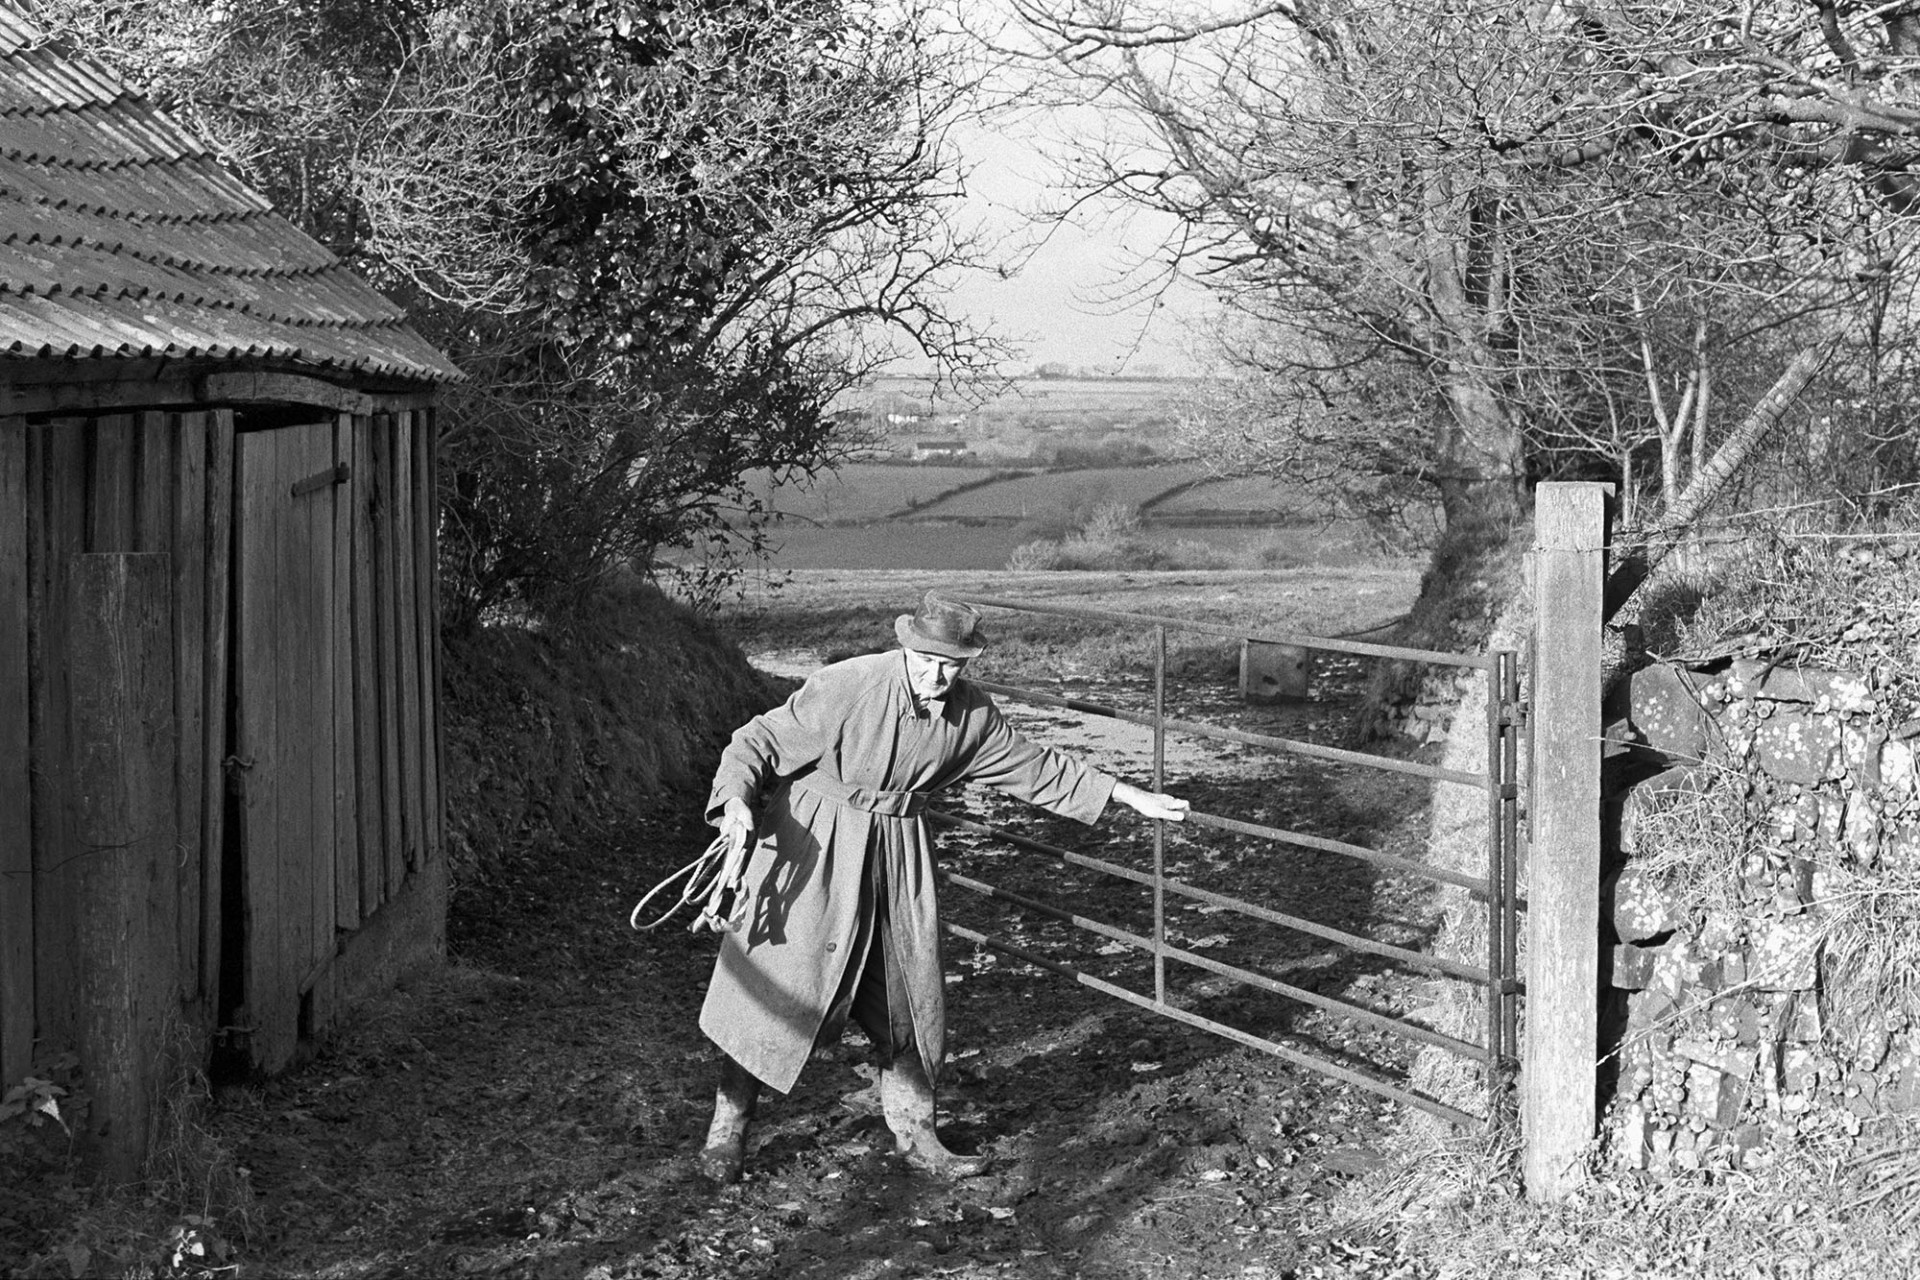 Farmer opening gate.
[Keith Allin opening a field gate next to a corrugated iron shed, at Cawseys, Roborough.]